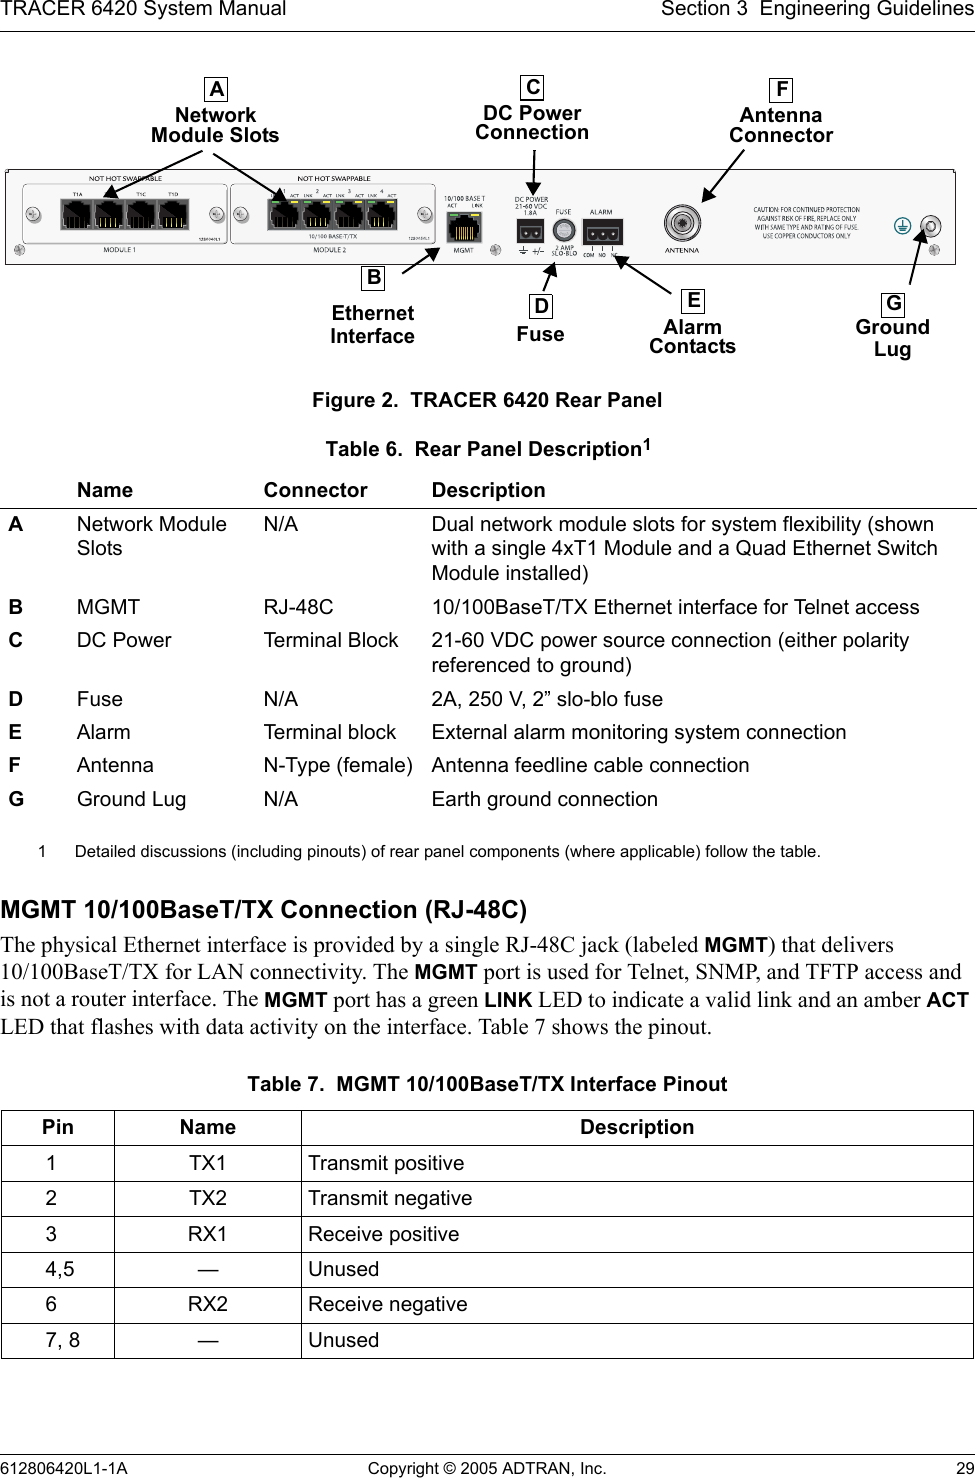 TRACER 6420 System Manual Section 3  Engineering Guidelines612806420L1-1A Copyright © 2005 ADTRAN, Inc. 29Figure 2.  TRACER 6420 Rear PanelMGMT 10/100BaseT/TX Connection (RJ-48C)The physical Ethernet interface is provided by a single RJ-48C jack (labeled MGMT) that delivers 10/100BaseT/TX for LAN connectivity. The MGMT port is used for Telnet, SNMP, and TFTP access and is not a router interface. The MGMT port has a green LINK LED to indicate a valid link and an amber ACT LED that flashes with data activity on the interface. Table 7 shows the pinout.Table 6.  Rear Panel Description11 Detailed discussions (including pinouts) of rear panel components (where applicable) follow the table.Name Connector DescriptionANetwork Module SlotsN/A Dual network module slots for system flexibility (shown with a single 4xT1 Module and a Quad Ethernet Switch Module installed)BMGMT RJ-48C 10/100BaseT/TX Ethernet interface for Telnet accessCDC Power Terminal Block 21-60 VDC power source connection (either polarity referenced to ground)DFuse N/A 2A, 250 V, 2” slo-blo fuseEAlarm Terminal block External alarm monitoring system connectionFAntenna N-Type (female) Antenna feedline cable connectionGGround Lug N/A Earth ground connectionTable 7.  MGMT 10/100BaseT/TX Interface Pinout Pin Name Description1TX1 Transmit positive2TX2 Transmit negative3RX1 Receive positive4,5 —Unused6RX2 Receive negative7, 8 —UnusedAntennaDC PowerConnection ConnectorGroundLugFuse AlarmContactsCFBEDGEthernetInterfaceNetworkModule SlotsA